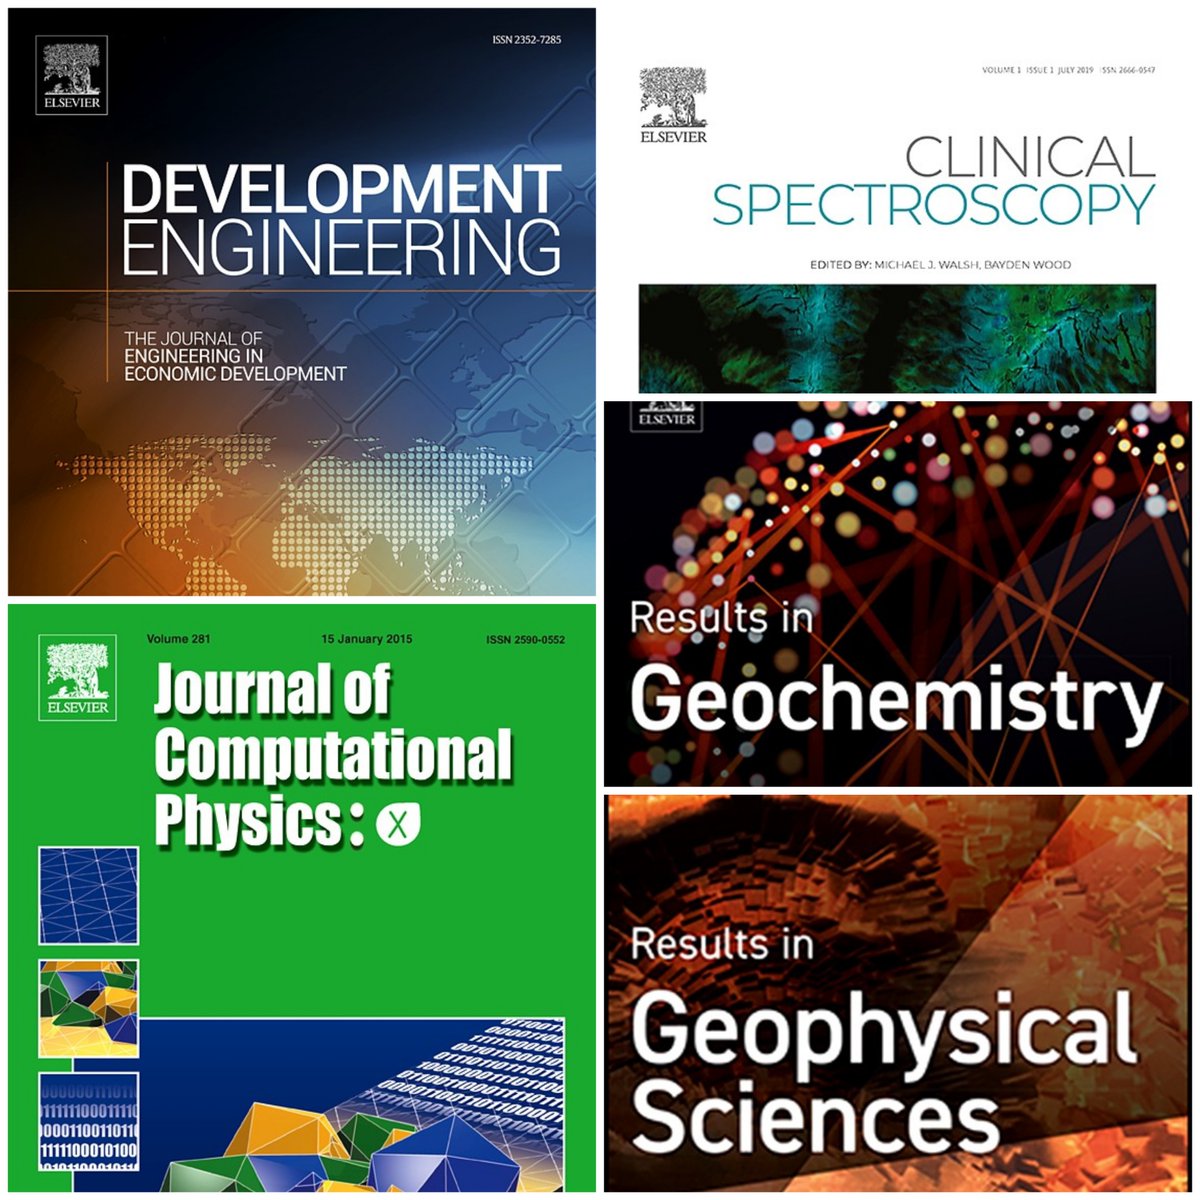 As of 2024, @ElsevierConnect has ceased publishing many #OpenAccess journals, including: 1⃣ Development Engineering (Est. 2016), 2⃣ J. Computational Physics: X (2019), 3⃣ Clinical Spectroscopy (2019), 4⃣ Results in Geochemistry (2020), 5⃣ Results in Geophysical Sciences (2020).